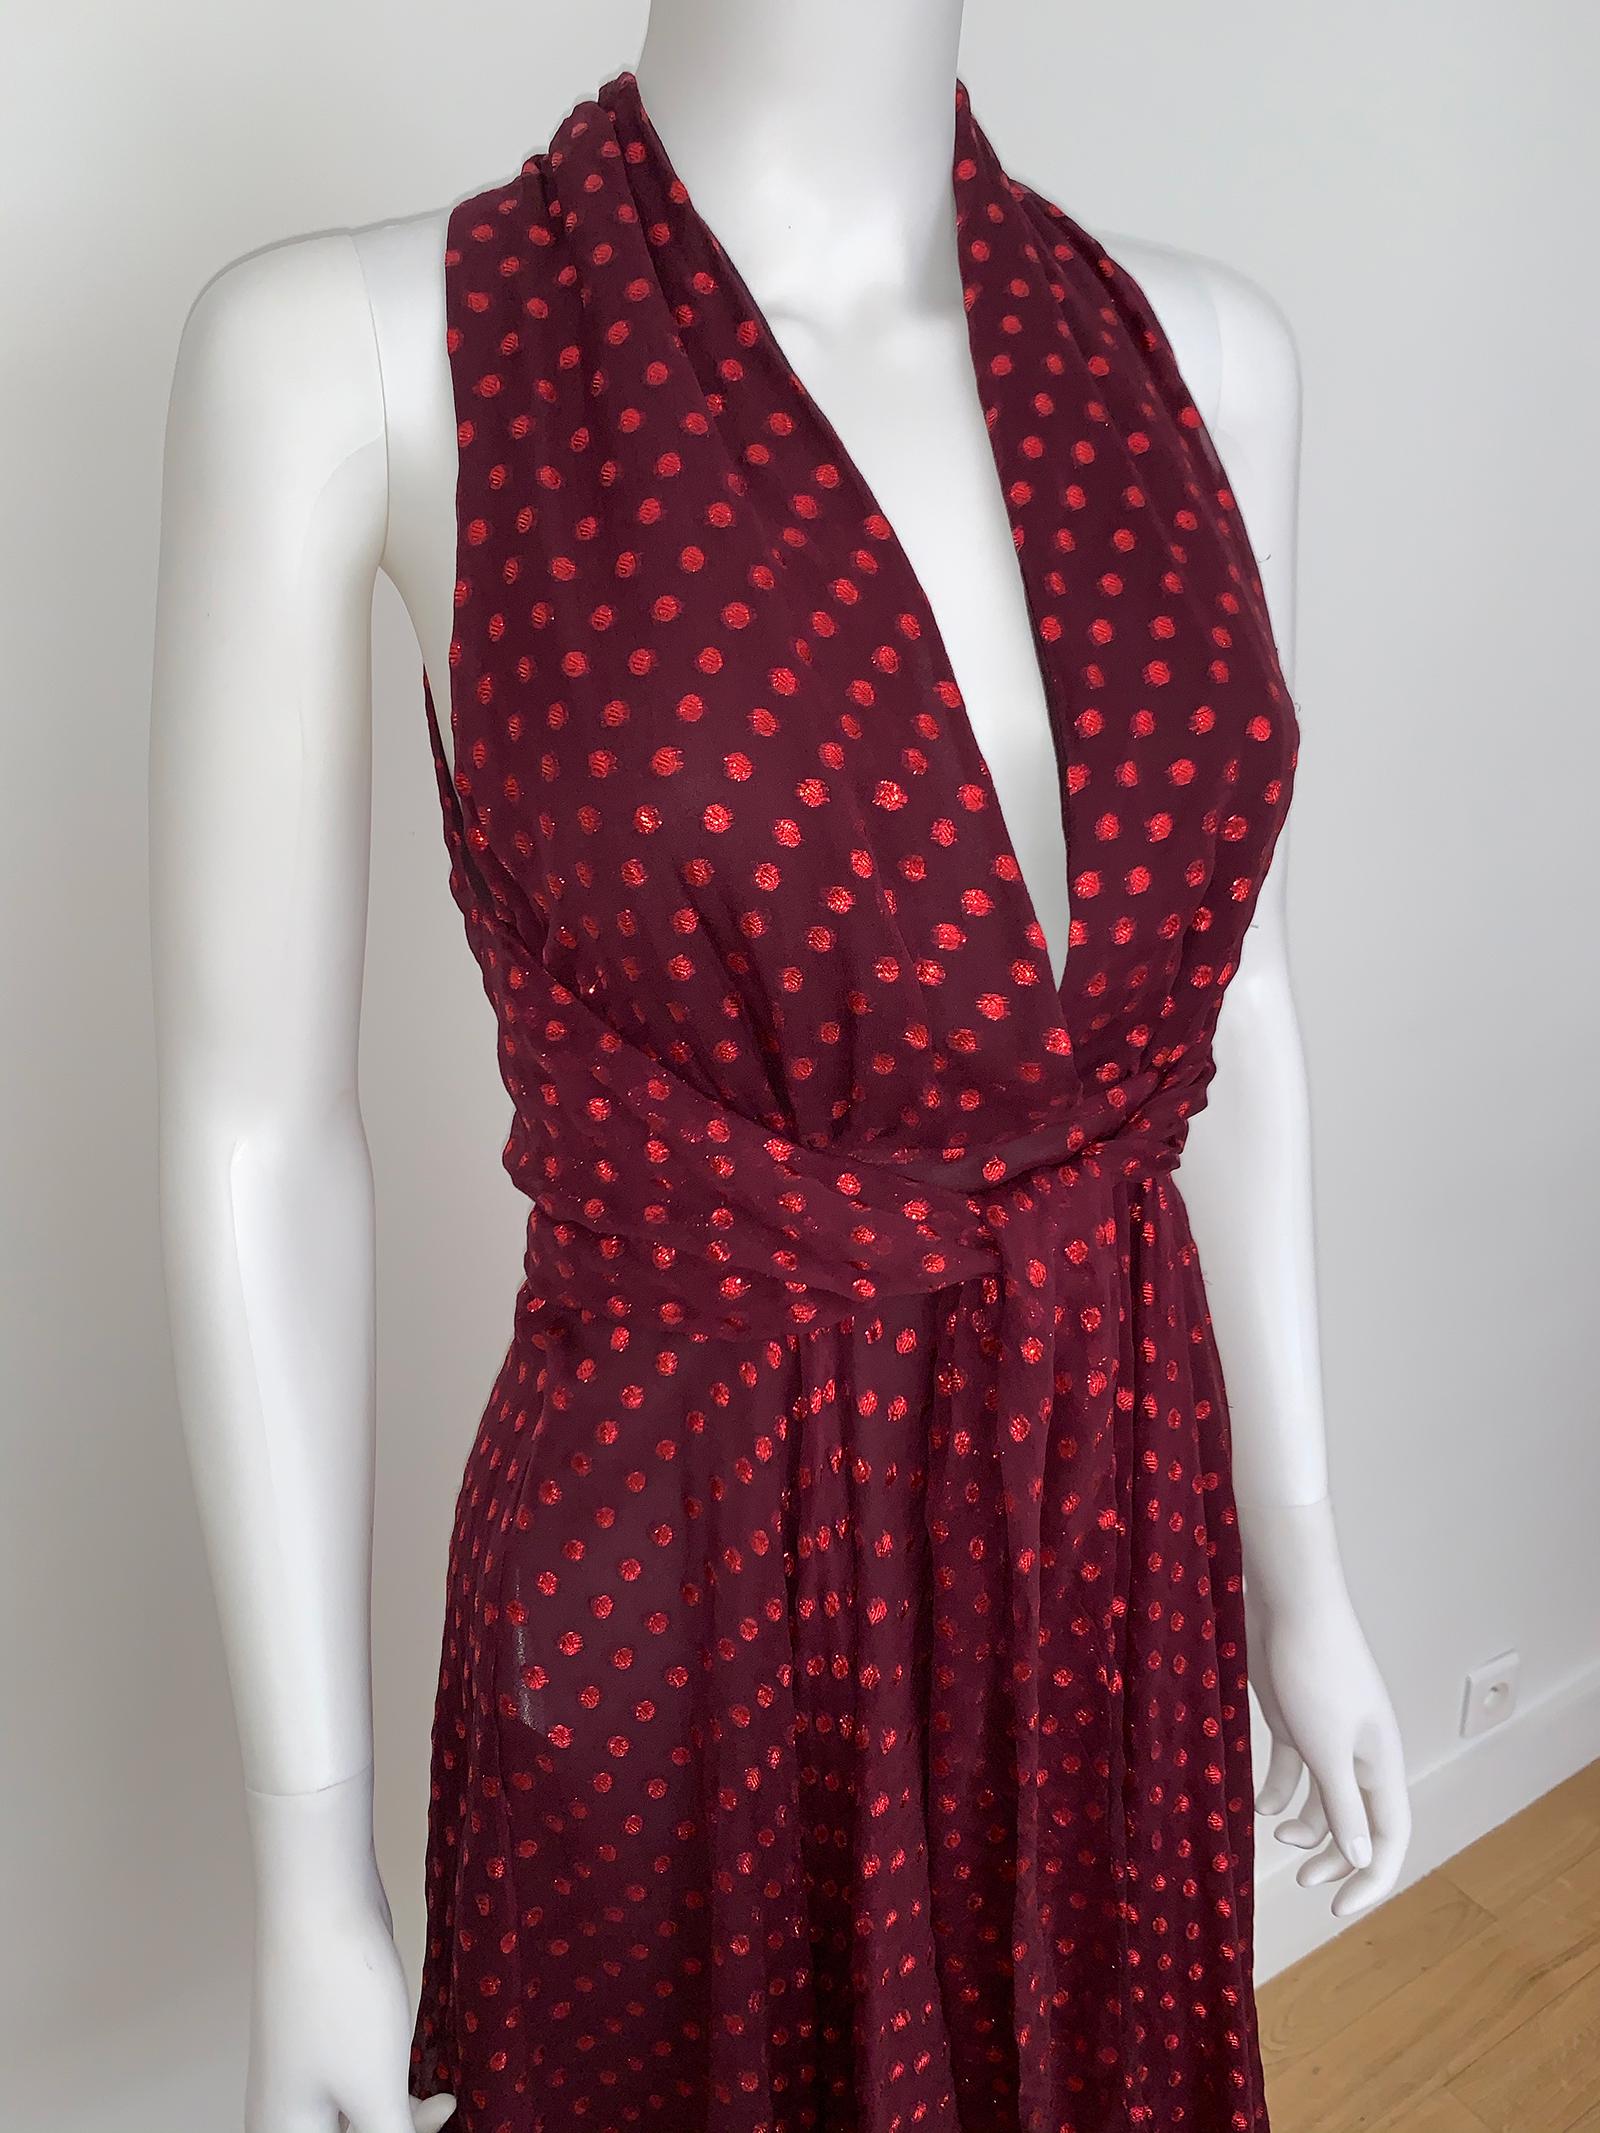 Vintage dress Gucci in silk. 
-Sleeveless
- V Neck 
- The back is also open
- Fitting is perfect and very flattering
- Burgundy color and Polka Dot print with lurex
- Size Small
- Perfect condition 
